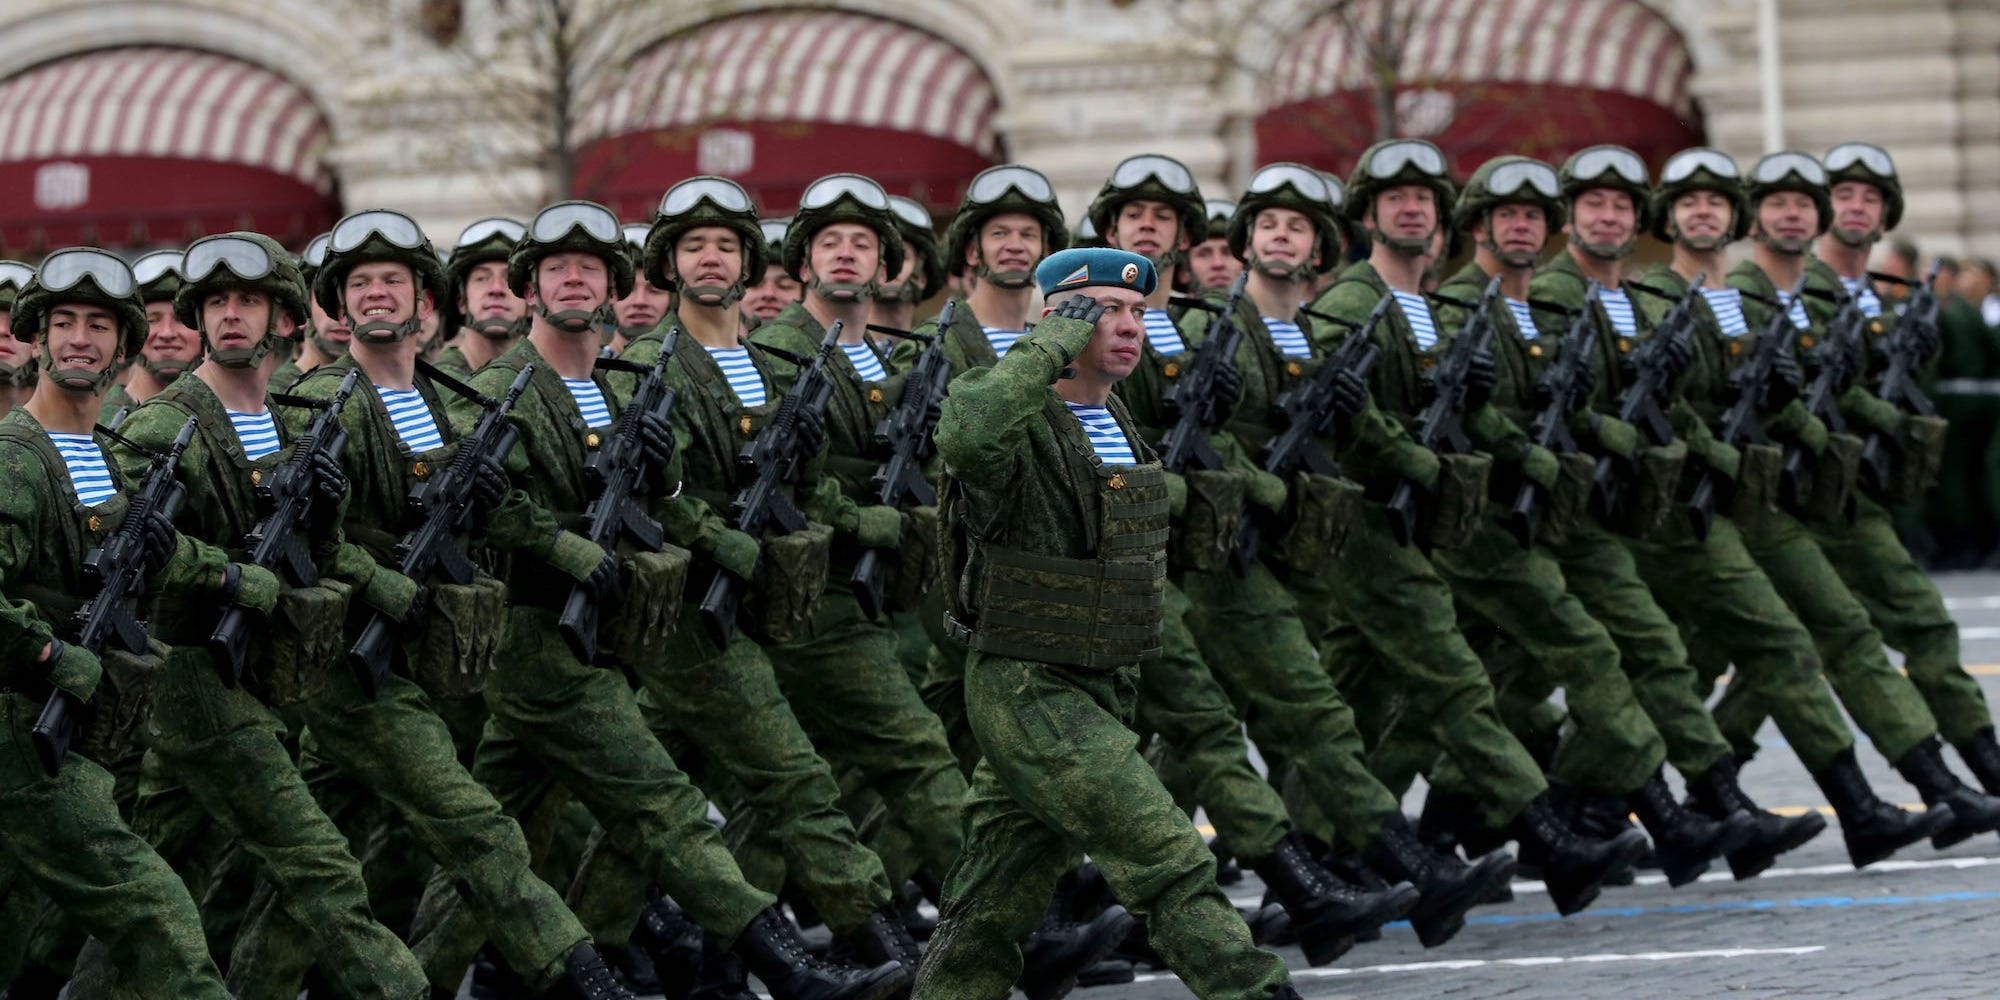 Russian Spetsnaz troops military parade